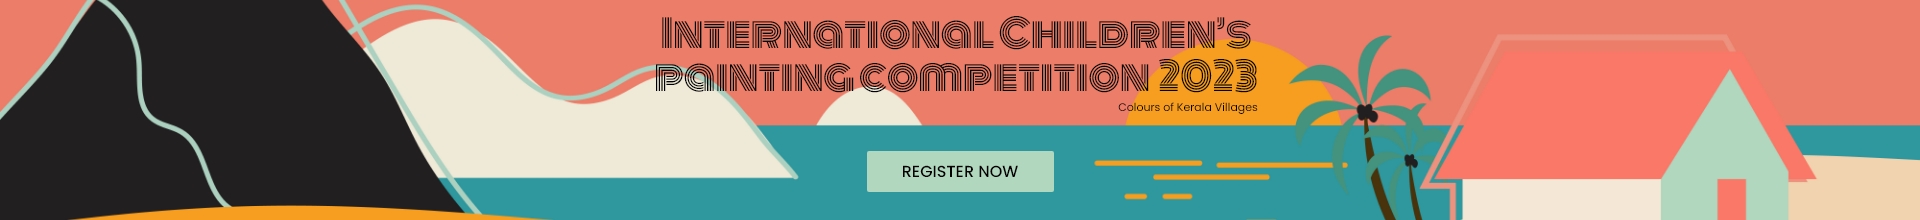 International Children's Painting Competition 2023